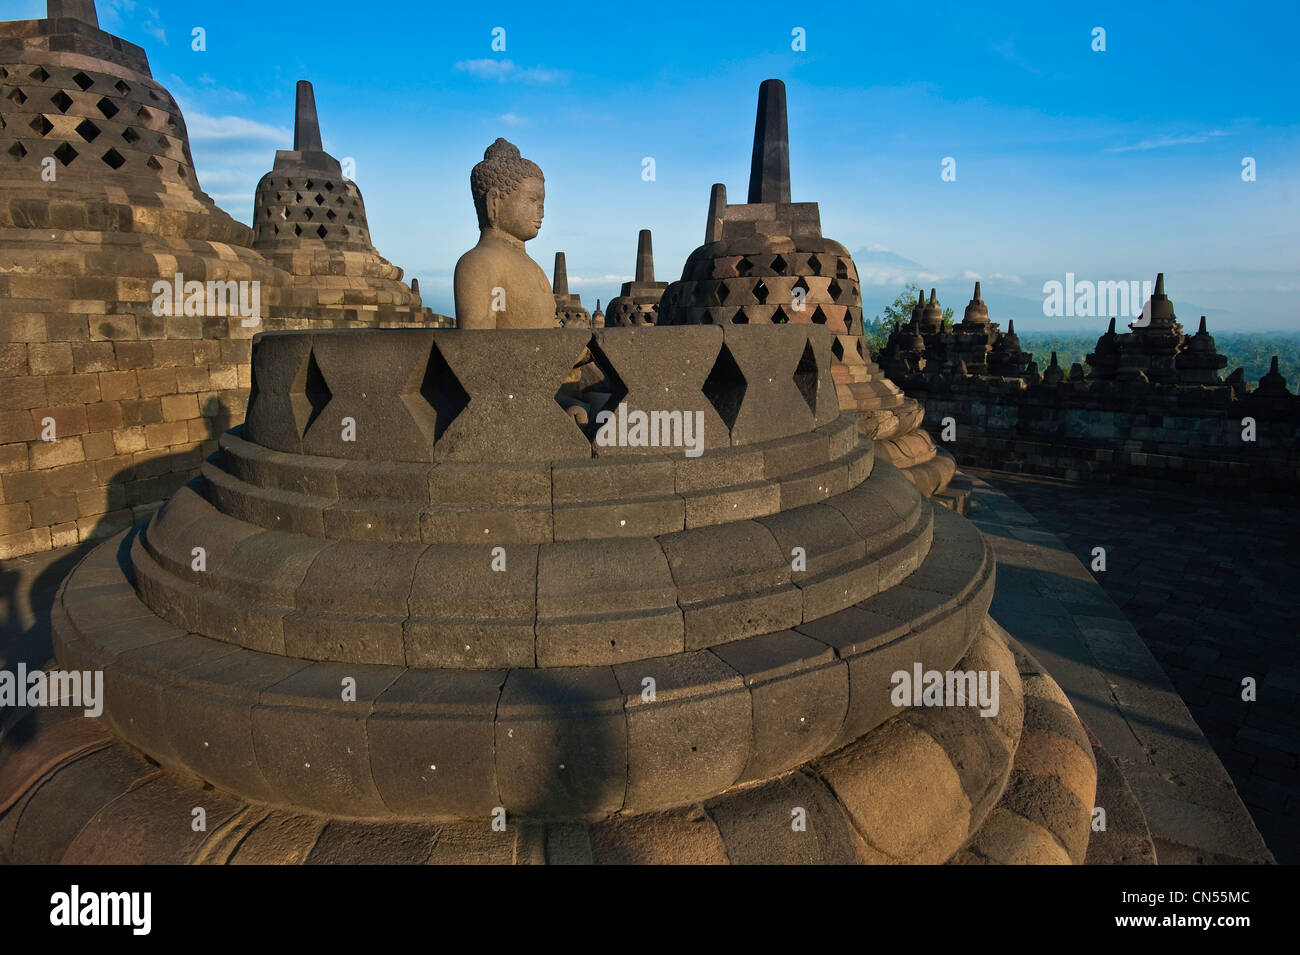 Indonesia, Java, Central Java Province, archeological site of Borobudur, Buddhist temple listed as World Heritage by UNESCO Stock Photo